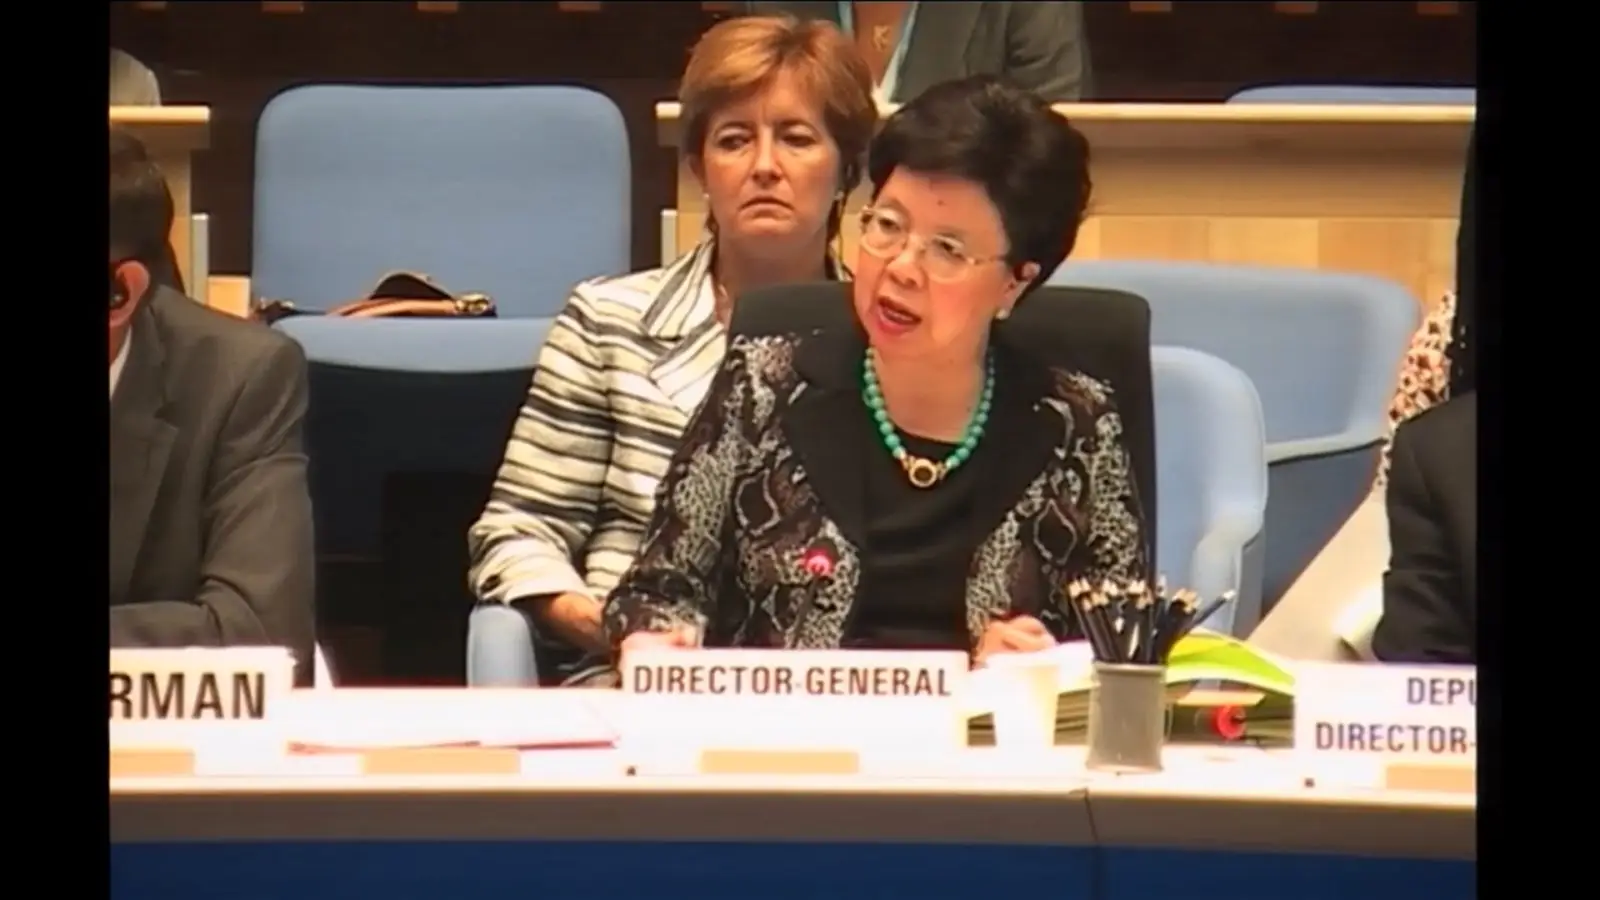 Dr Margaret Chan, Director-General addresses the 70th World Health Assembly